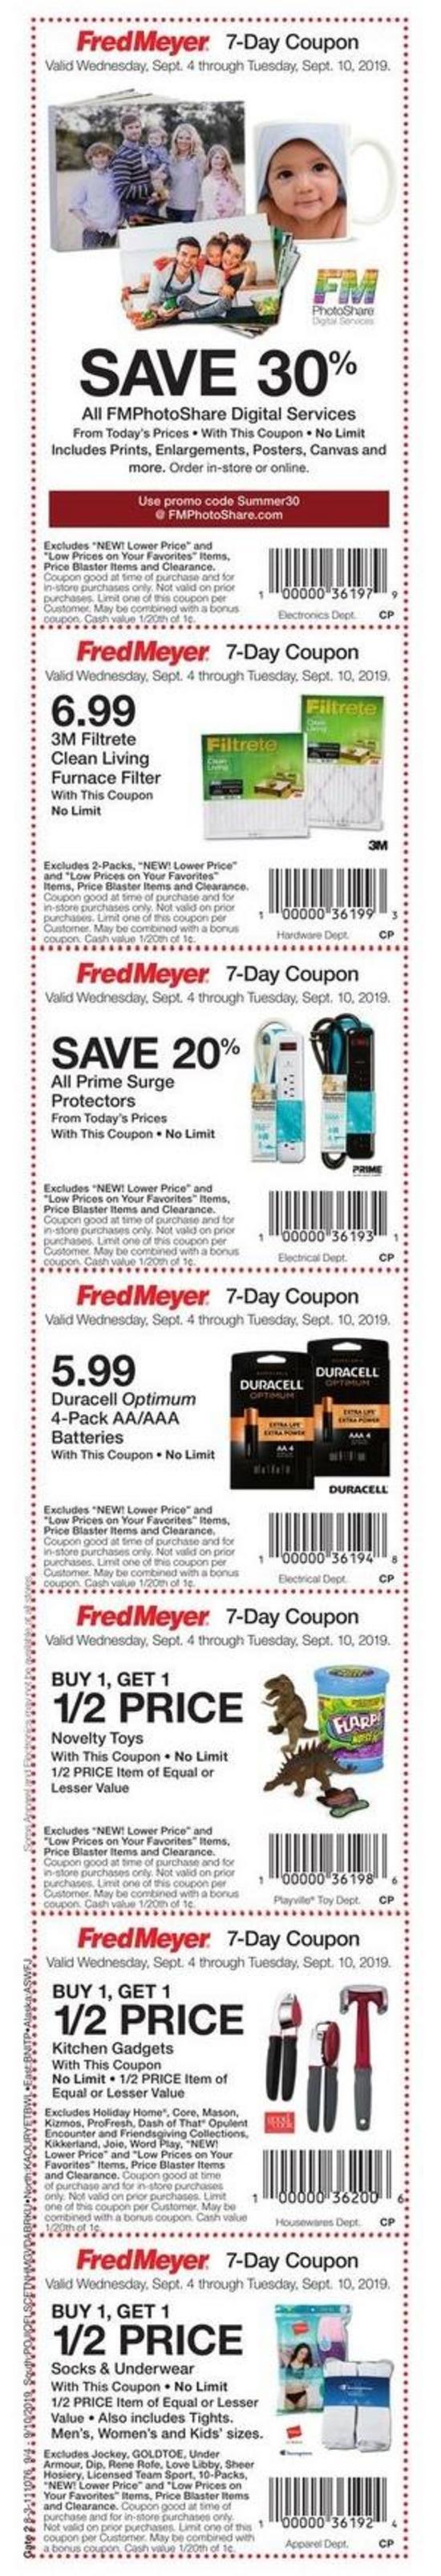 Fred Meyer Weekly Ad from September 4